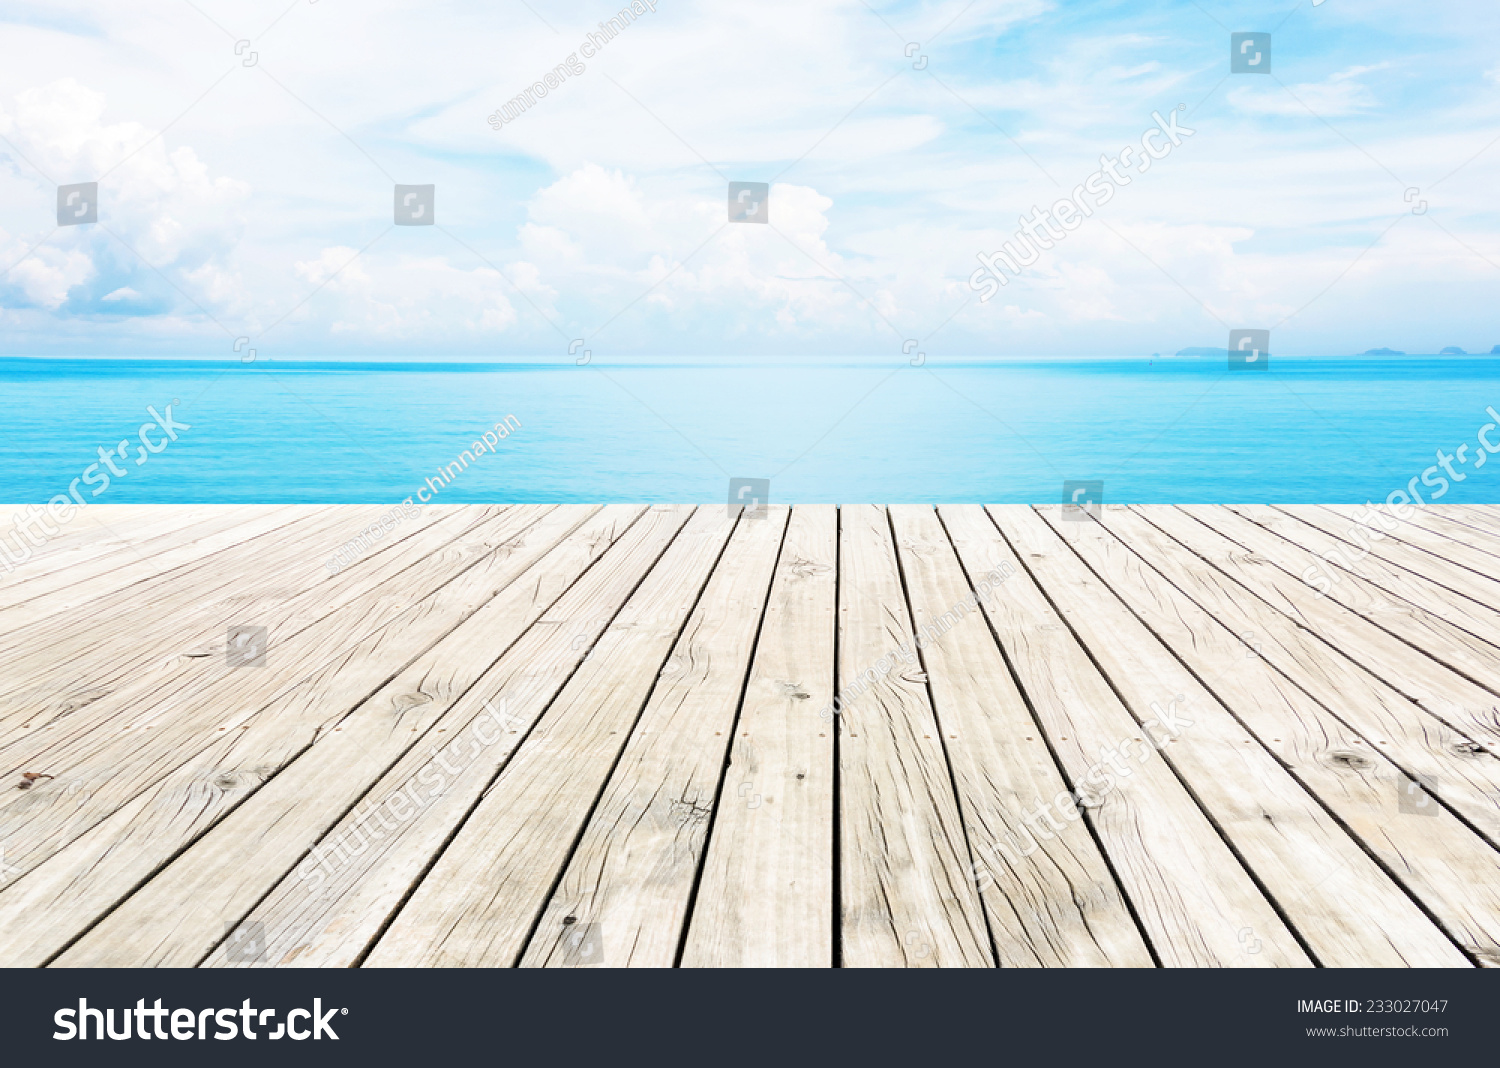 Wooden pier with blue sea and sky background  #233027047